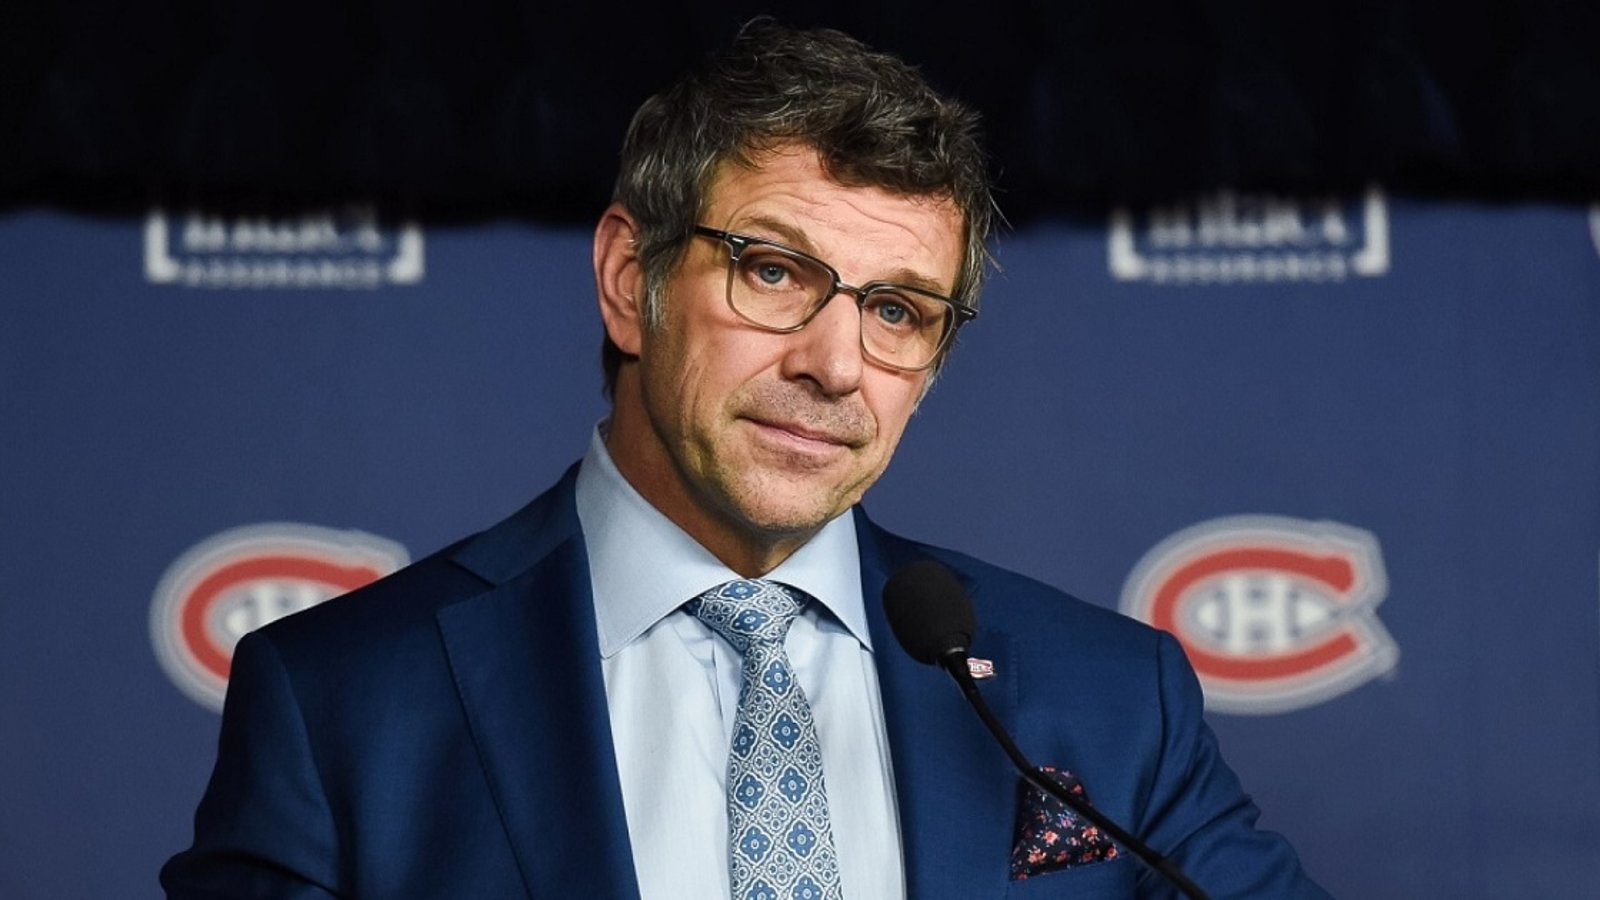 Bergevin spotted at NHL game, linked to extremely controversial trade.